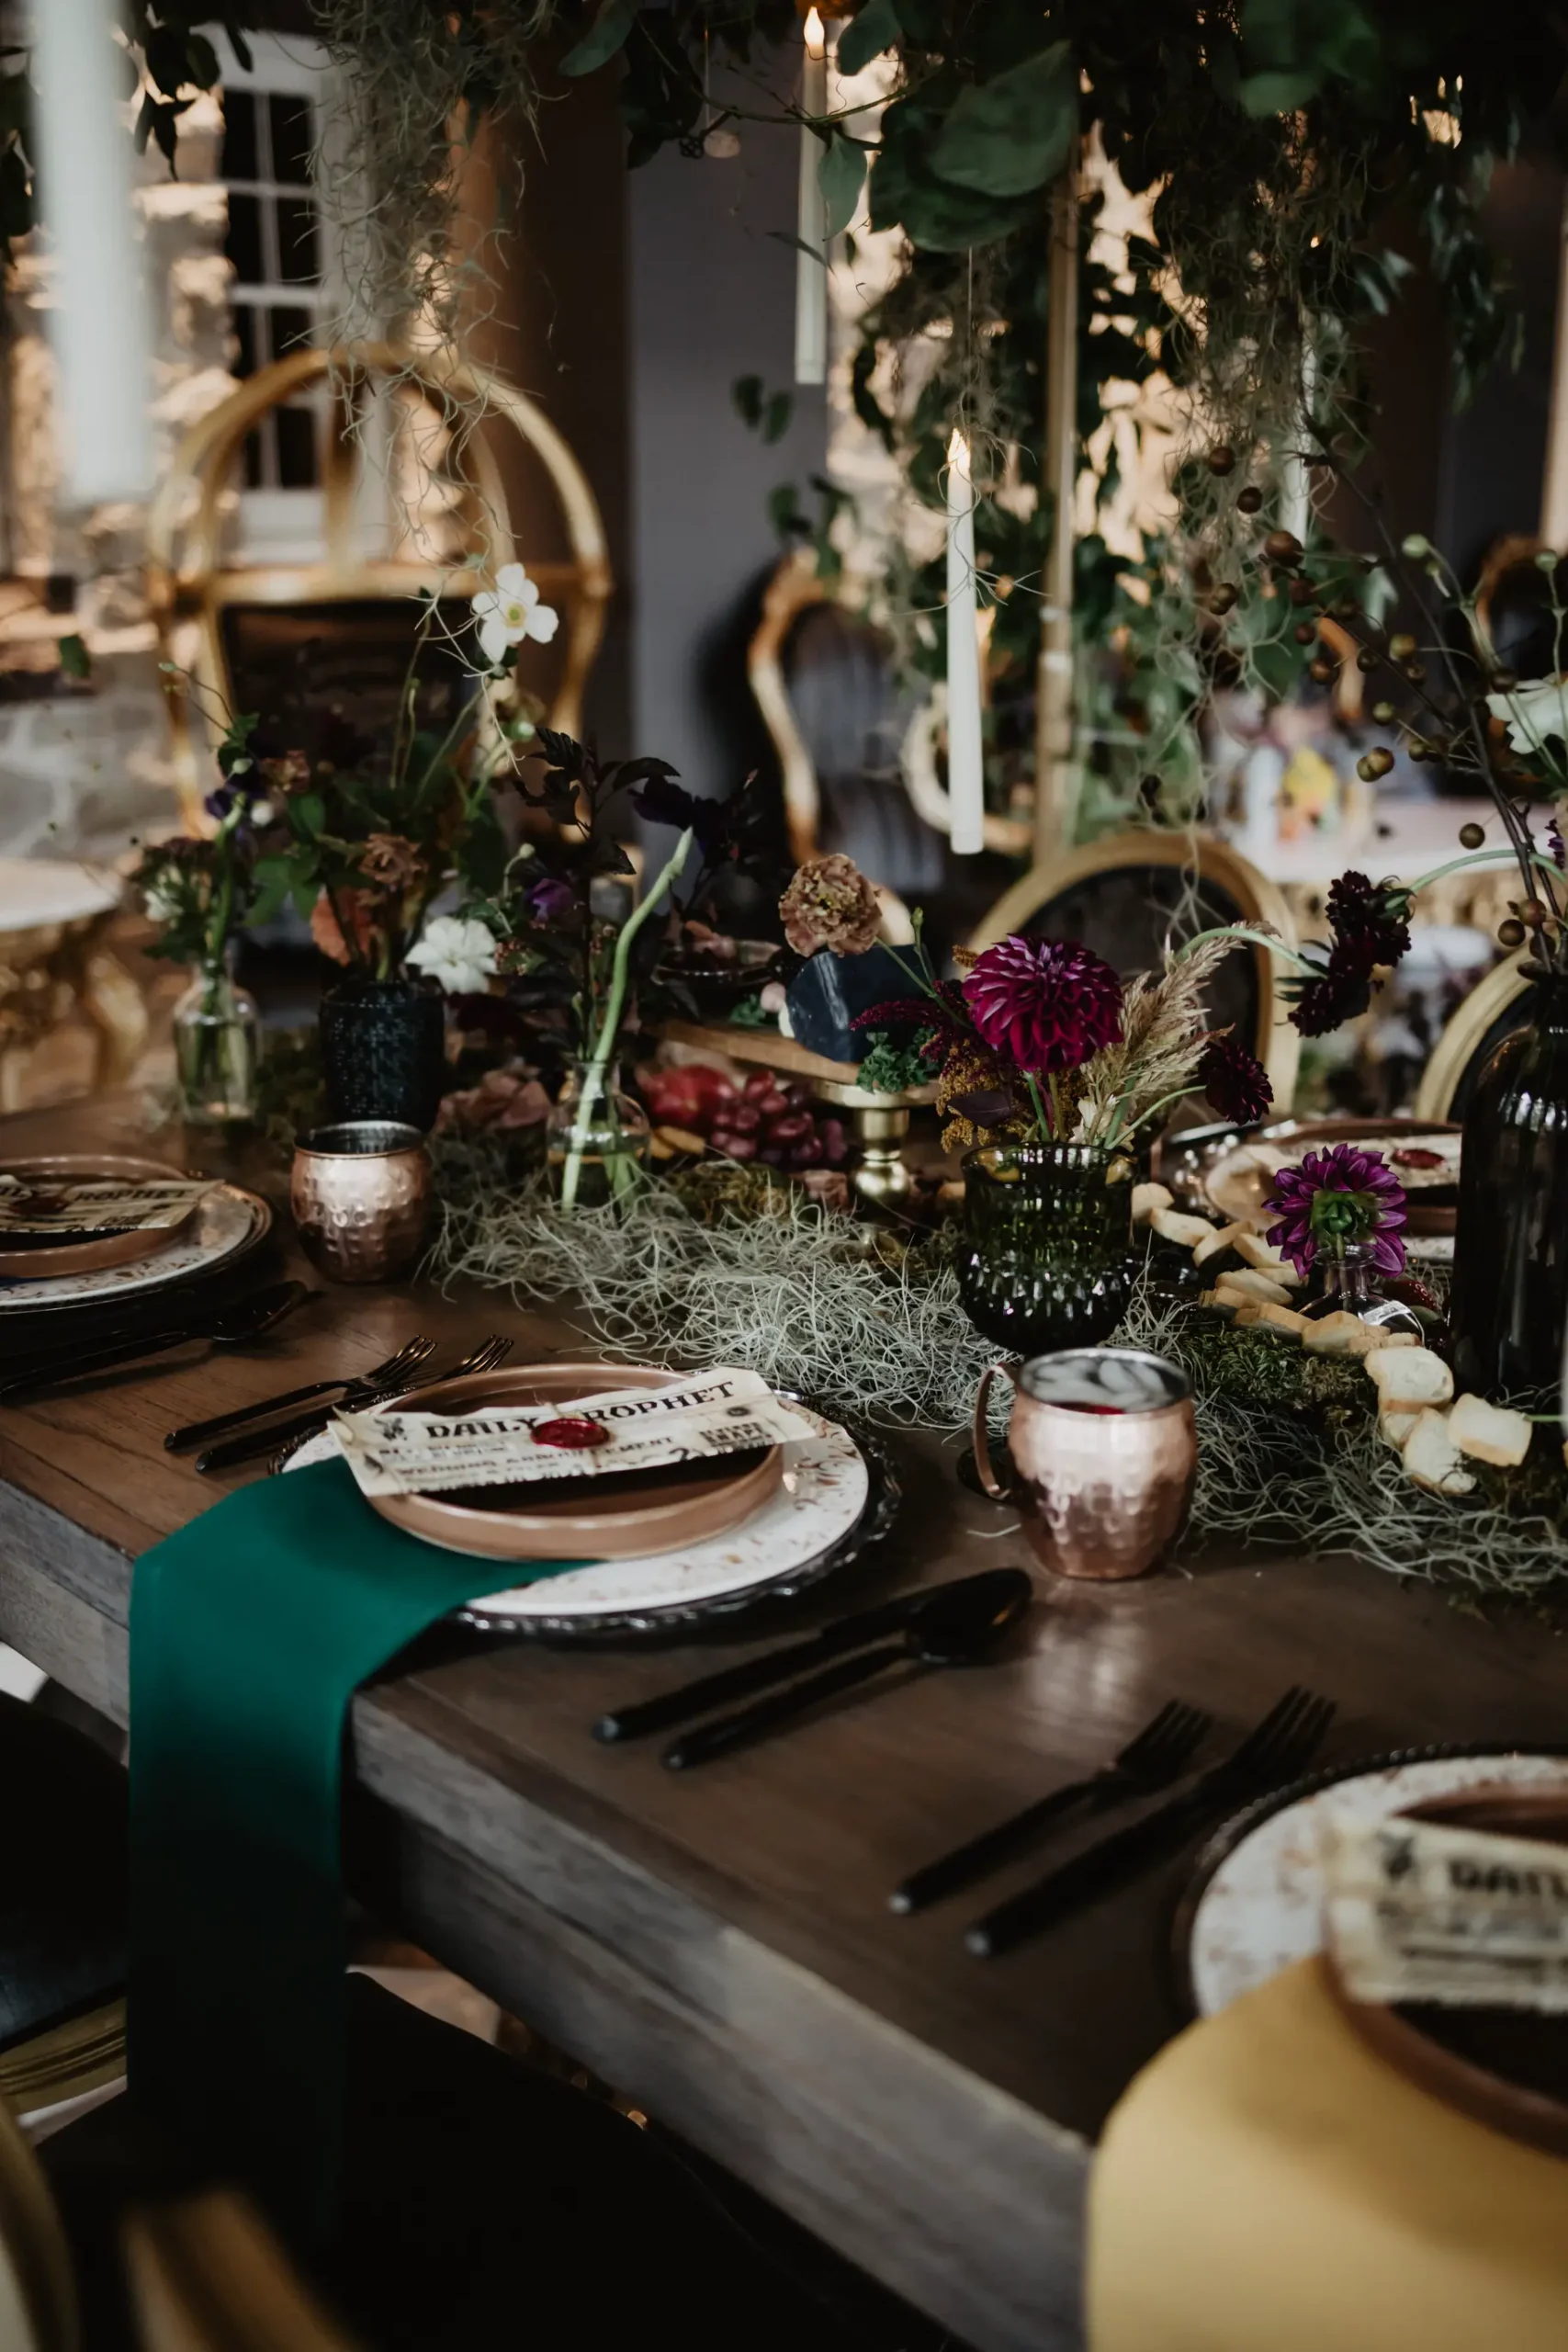 https://atozeventrentalsofpa.com/wp-content/uploads/2021/04/bryony-tablescape-scaled.webp